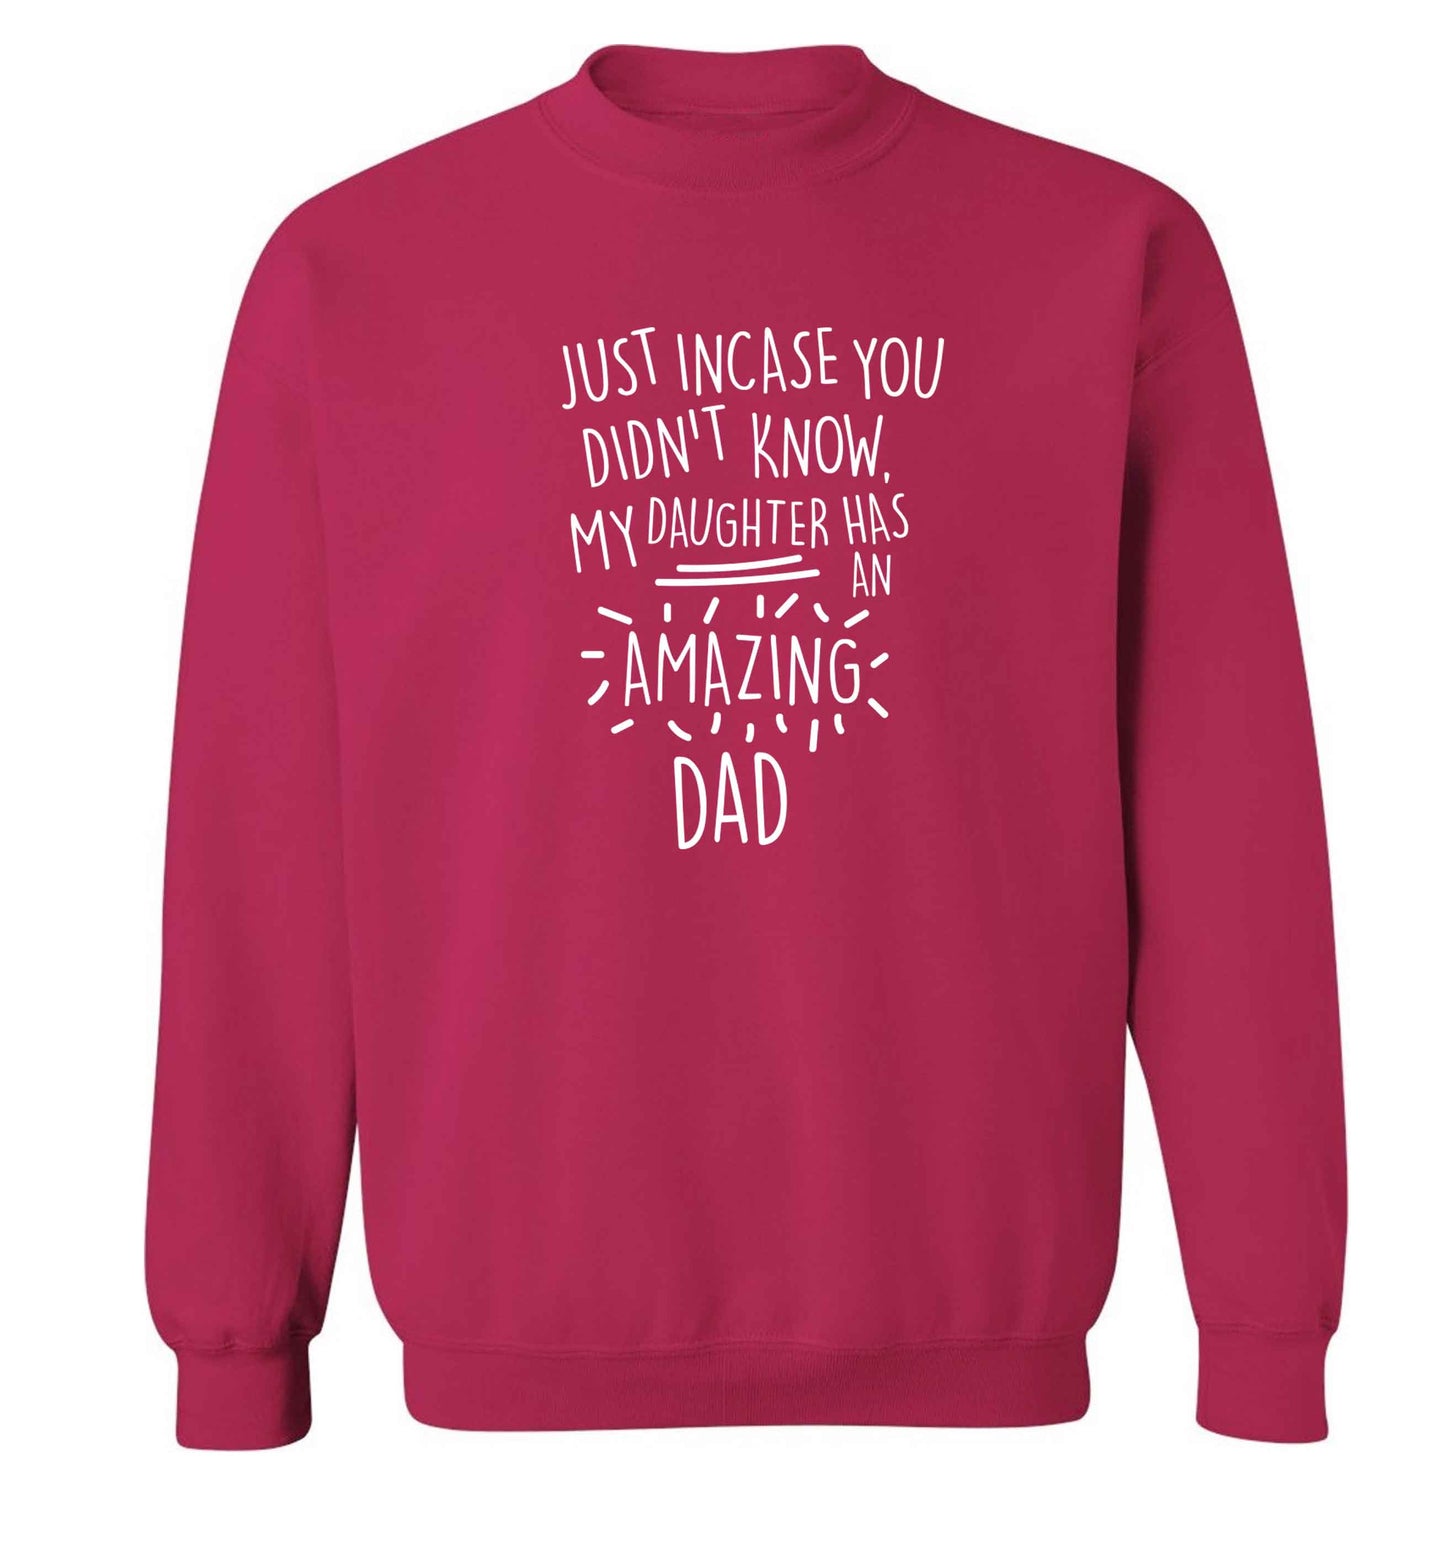 Just incase you didn't know my daughter has an amazing dad adult's unisex pink sweater 2XL